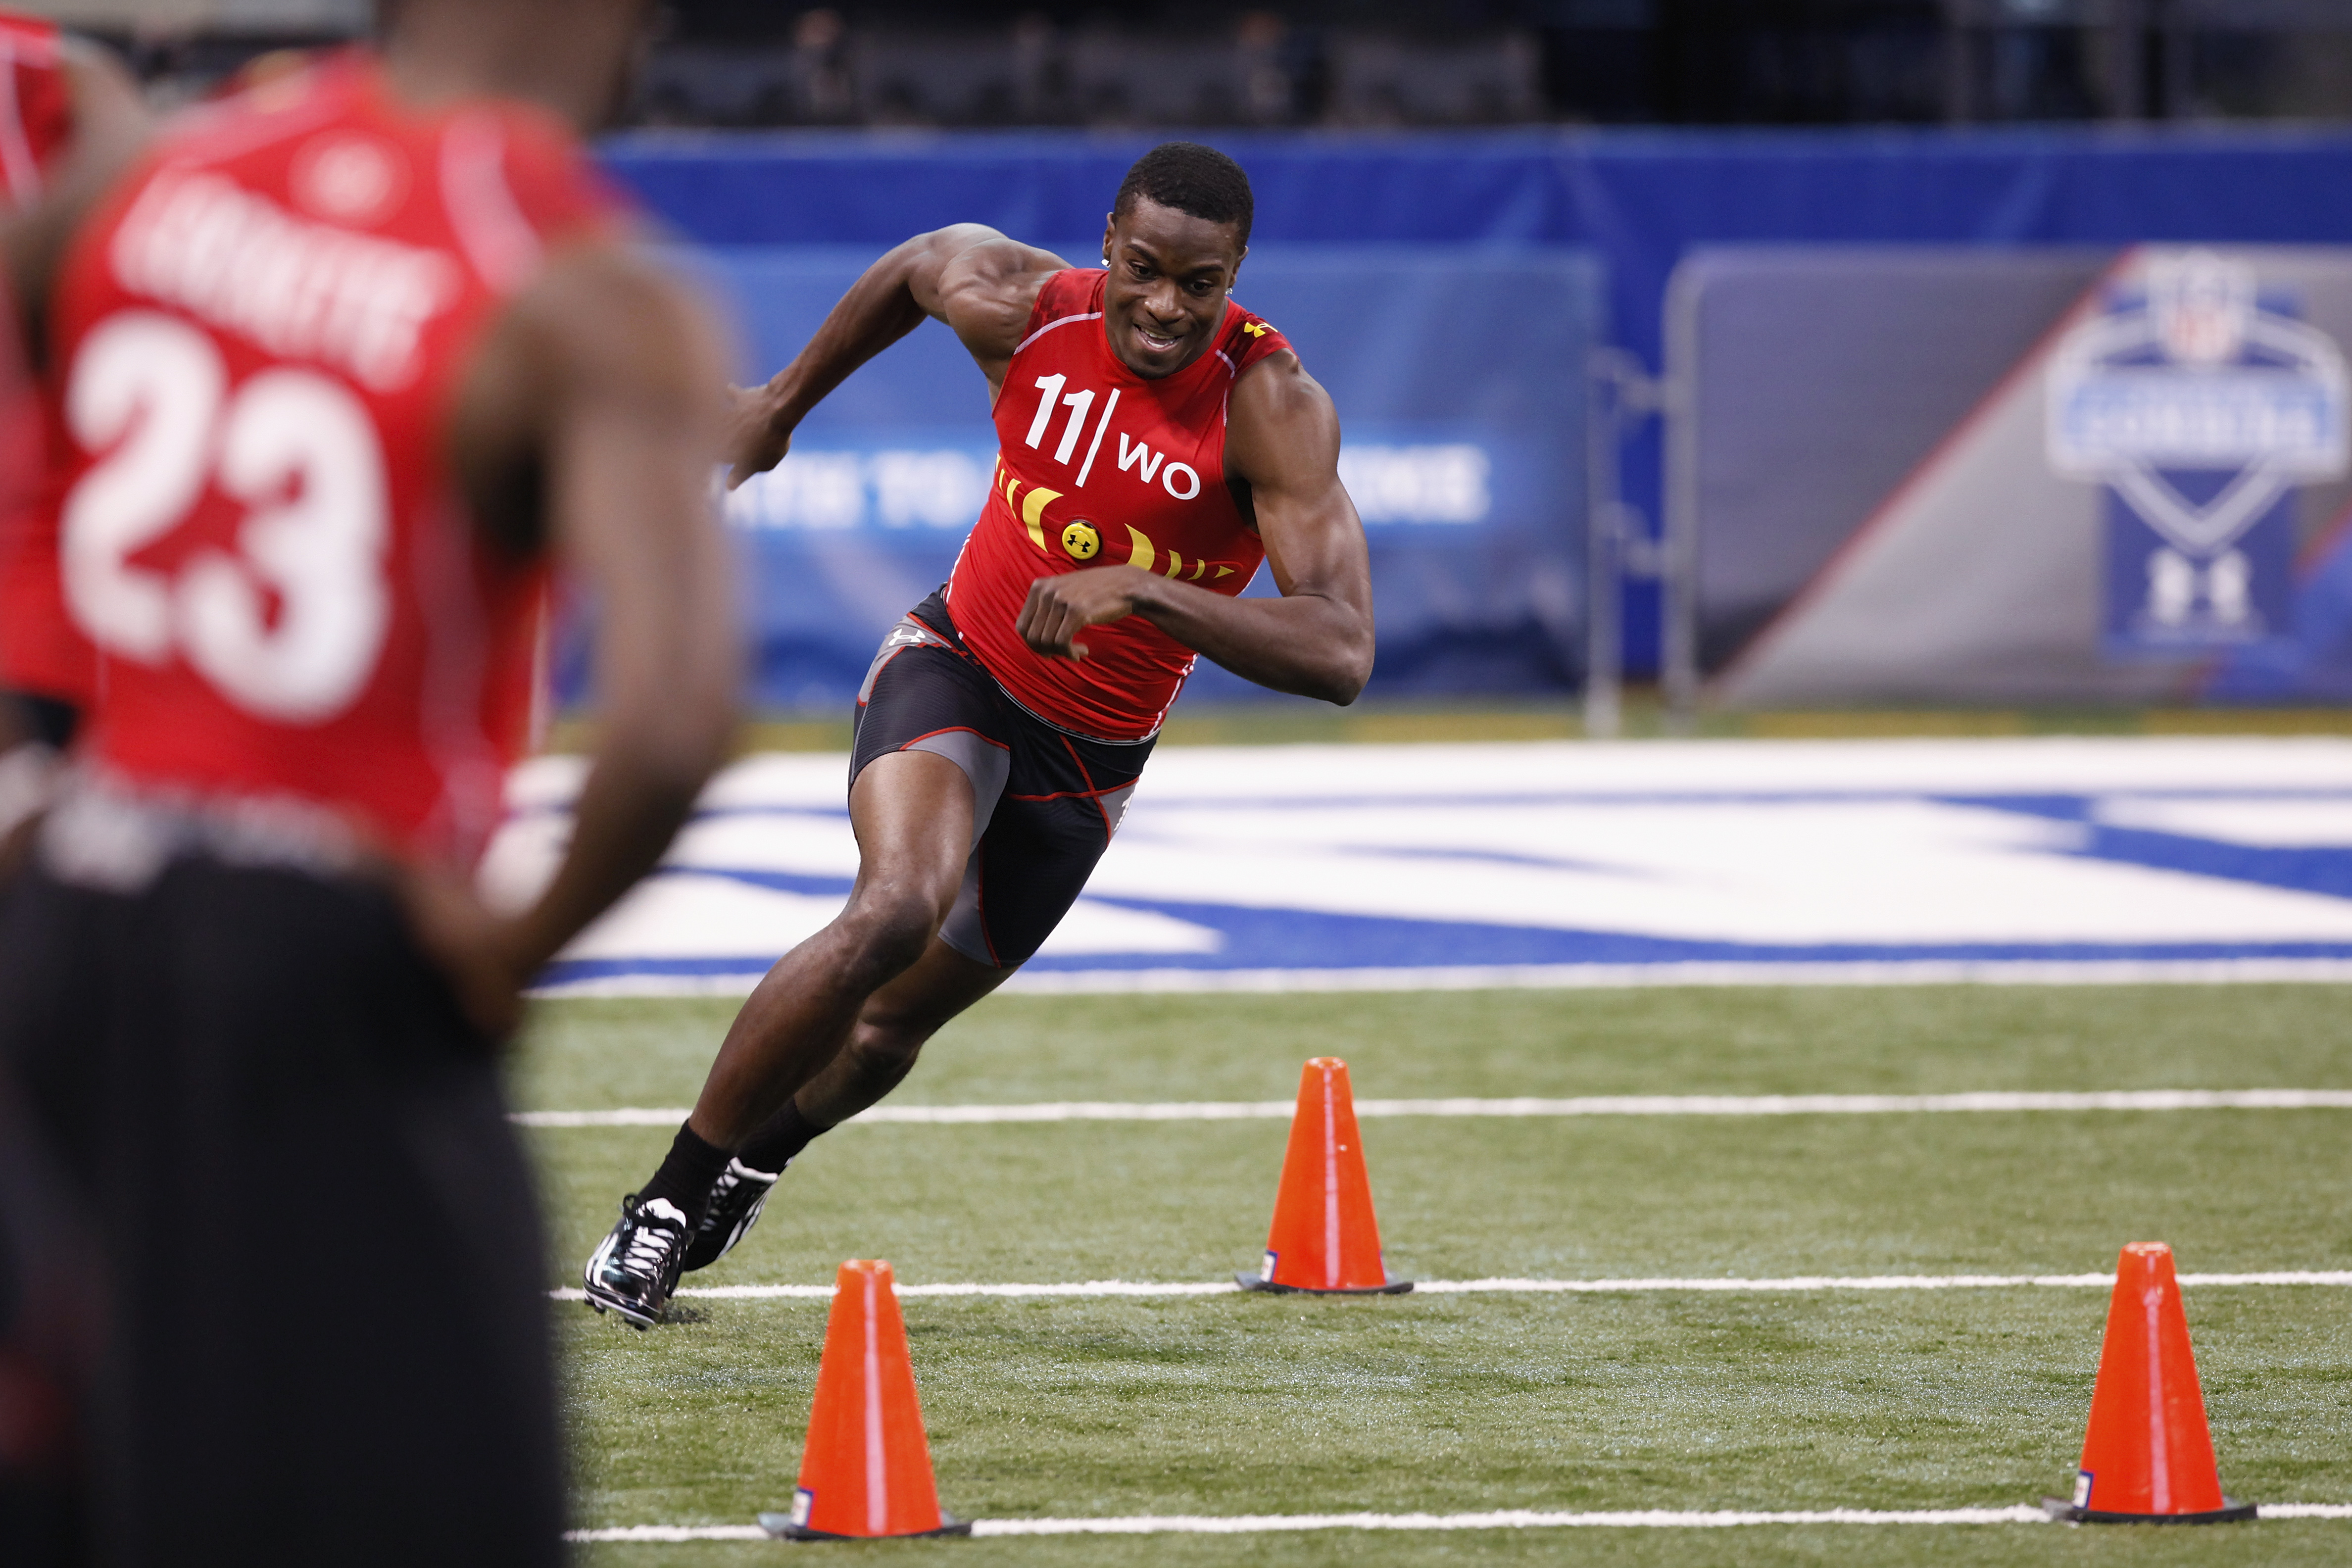 INDIANAPOLIS, IN - FEBRUARY 27: Wide receiver A.J. Green of Georgia runs through a drill during the 2011 NFL Scouting Combine at Lucas Oil Stadium on February 27, 2011 in Indianapolis, Indiana. (Photo by Joe Robbins/Getty Images)